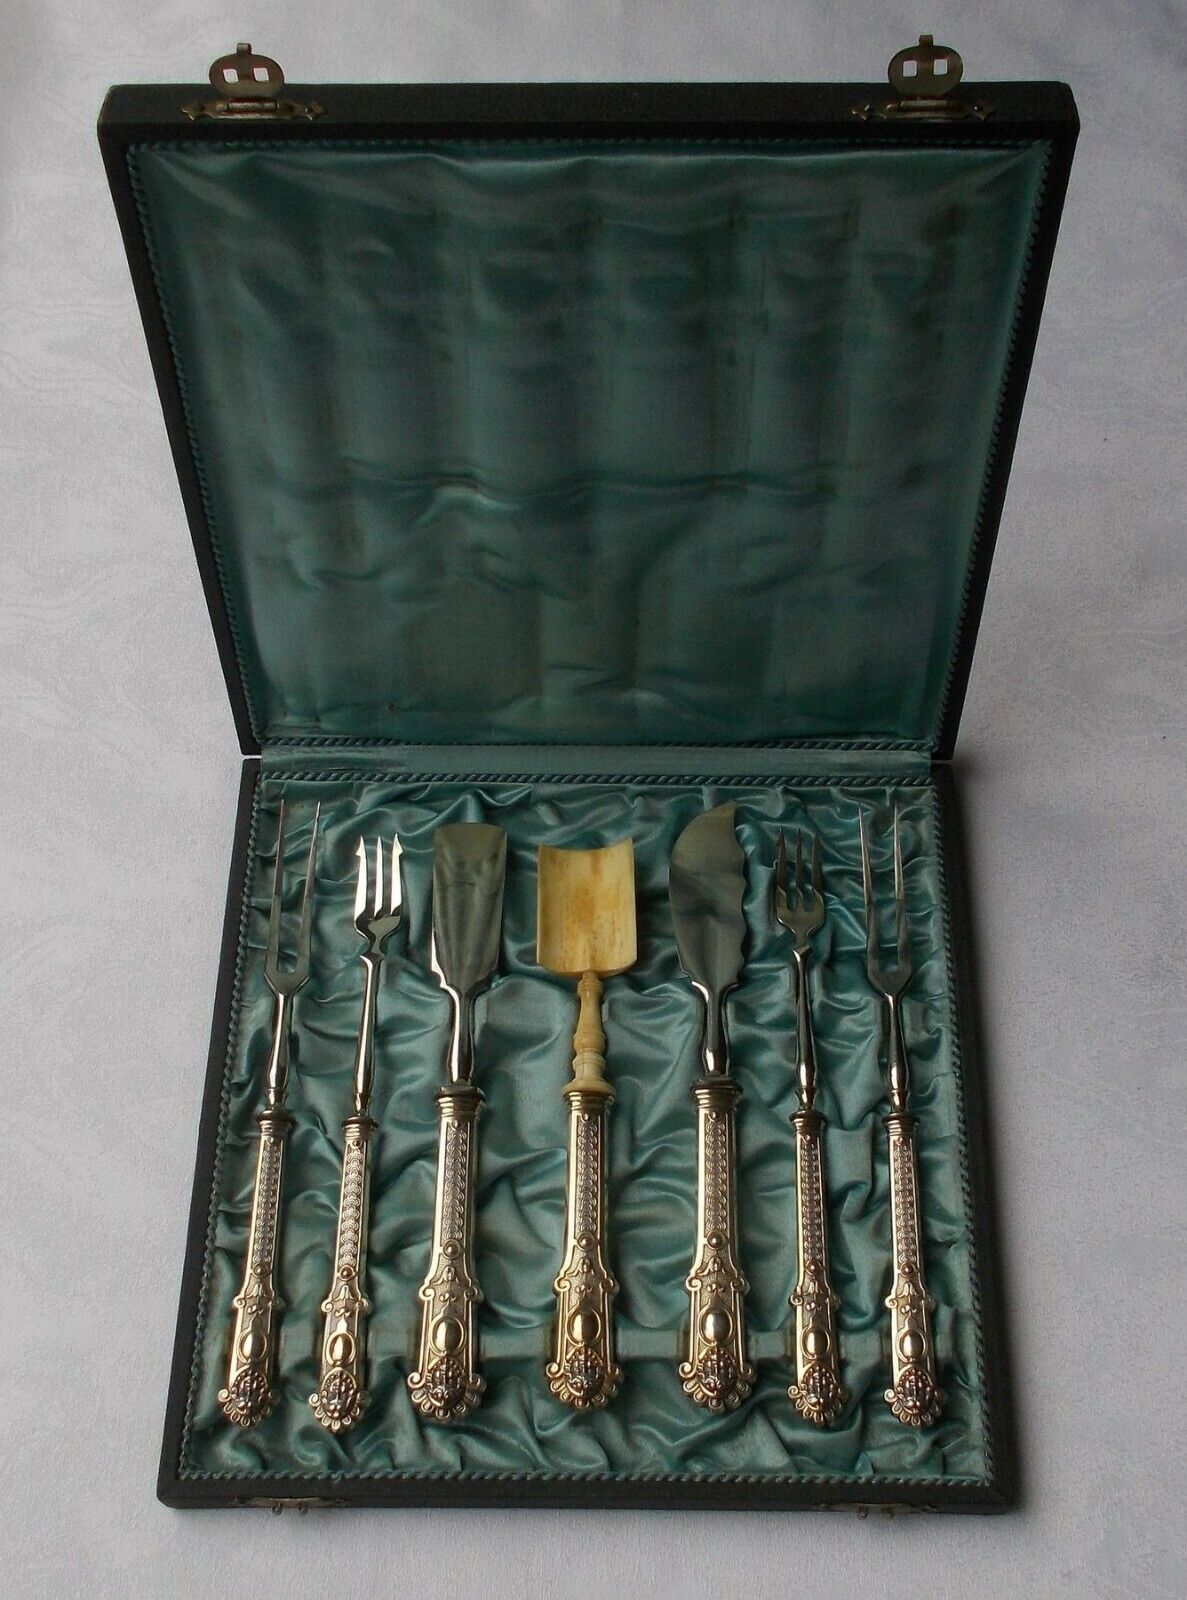 Rare Serving Cutlery Historicism Um 1880 With Mascarons IN 800er Silver